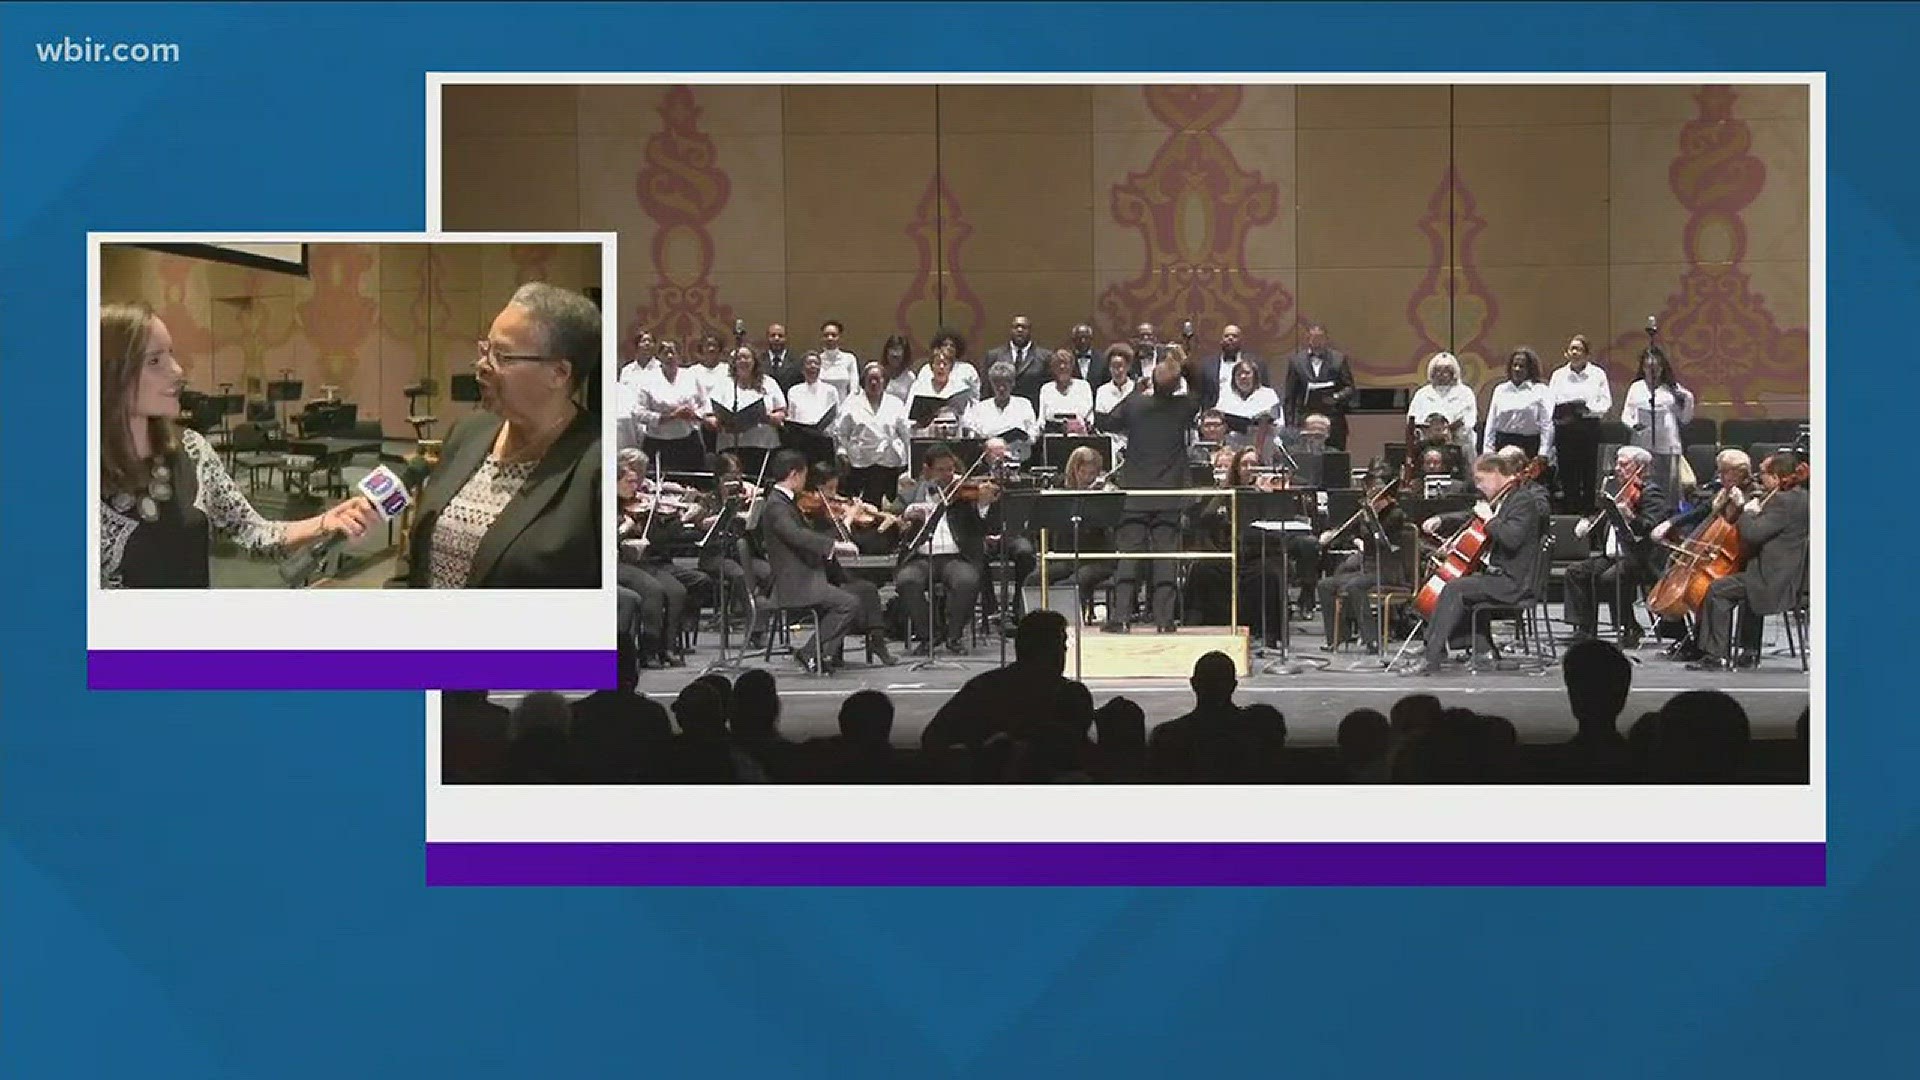 KSO is playing a free concert in honor of Martin Luther King Junior.